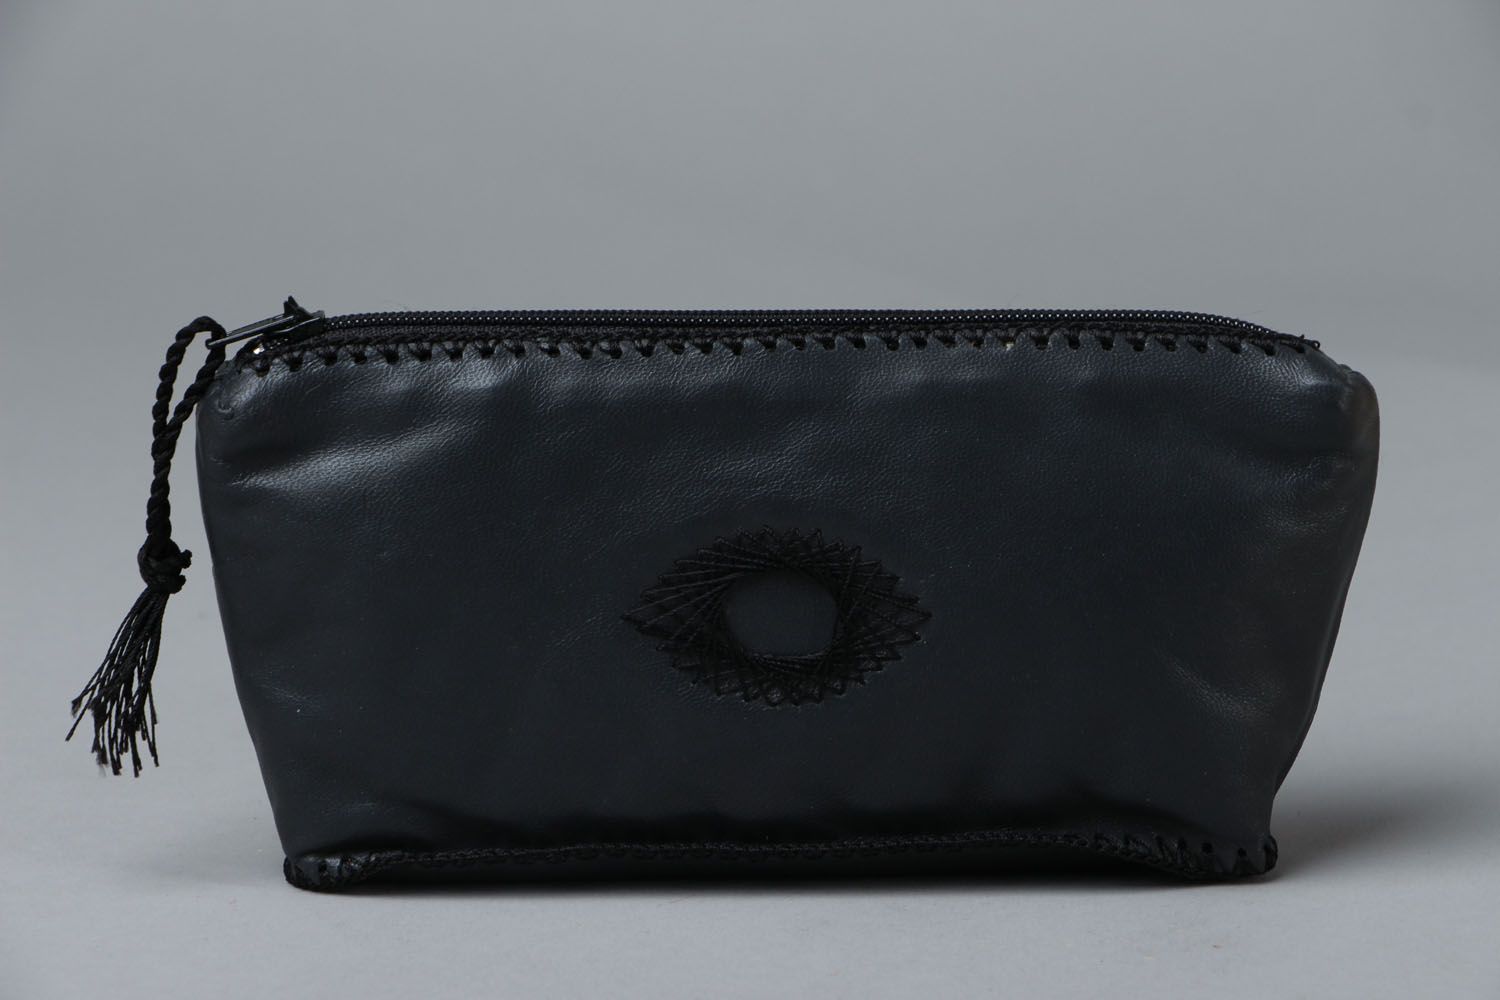 Black leather beauty bag with embroidery photo 1